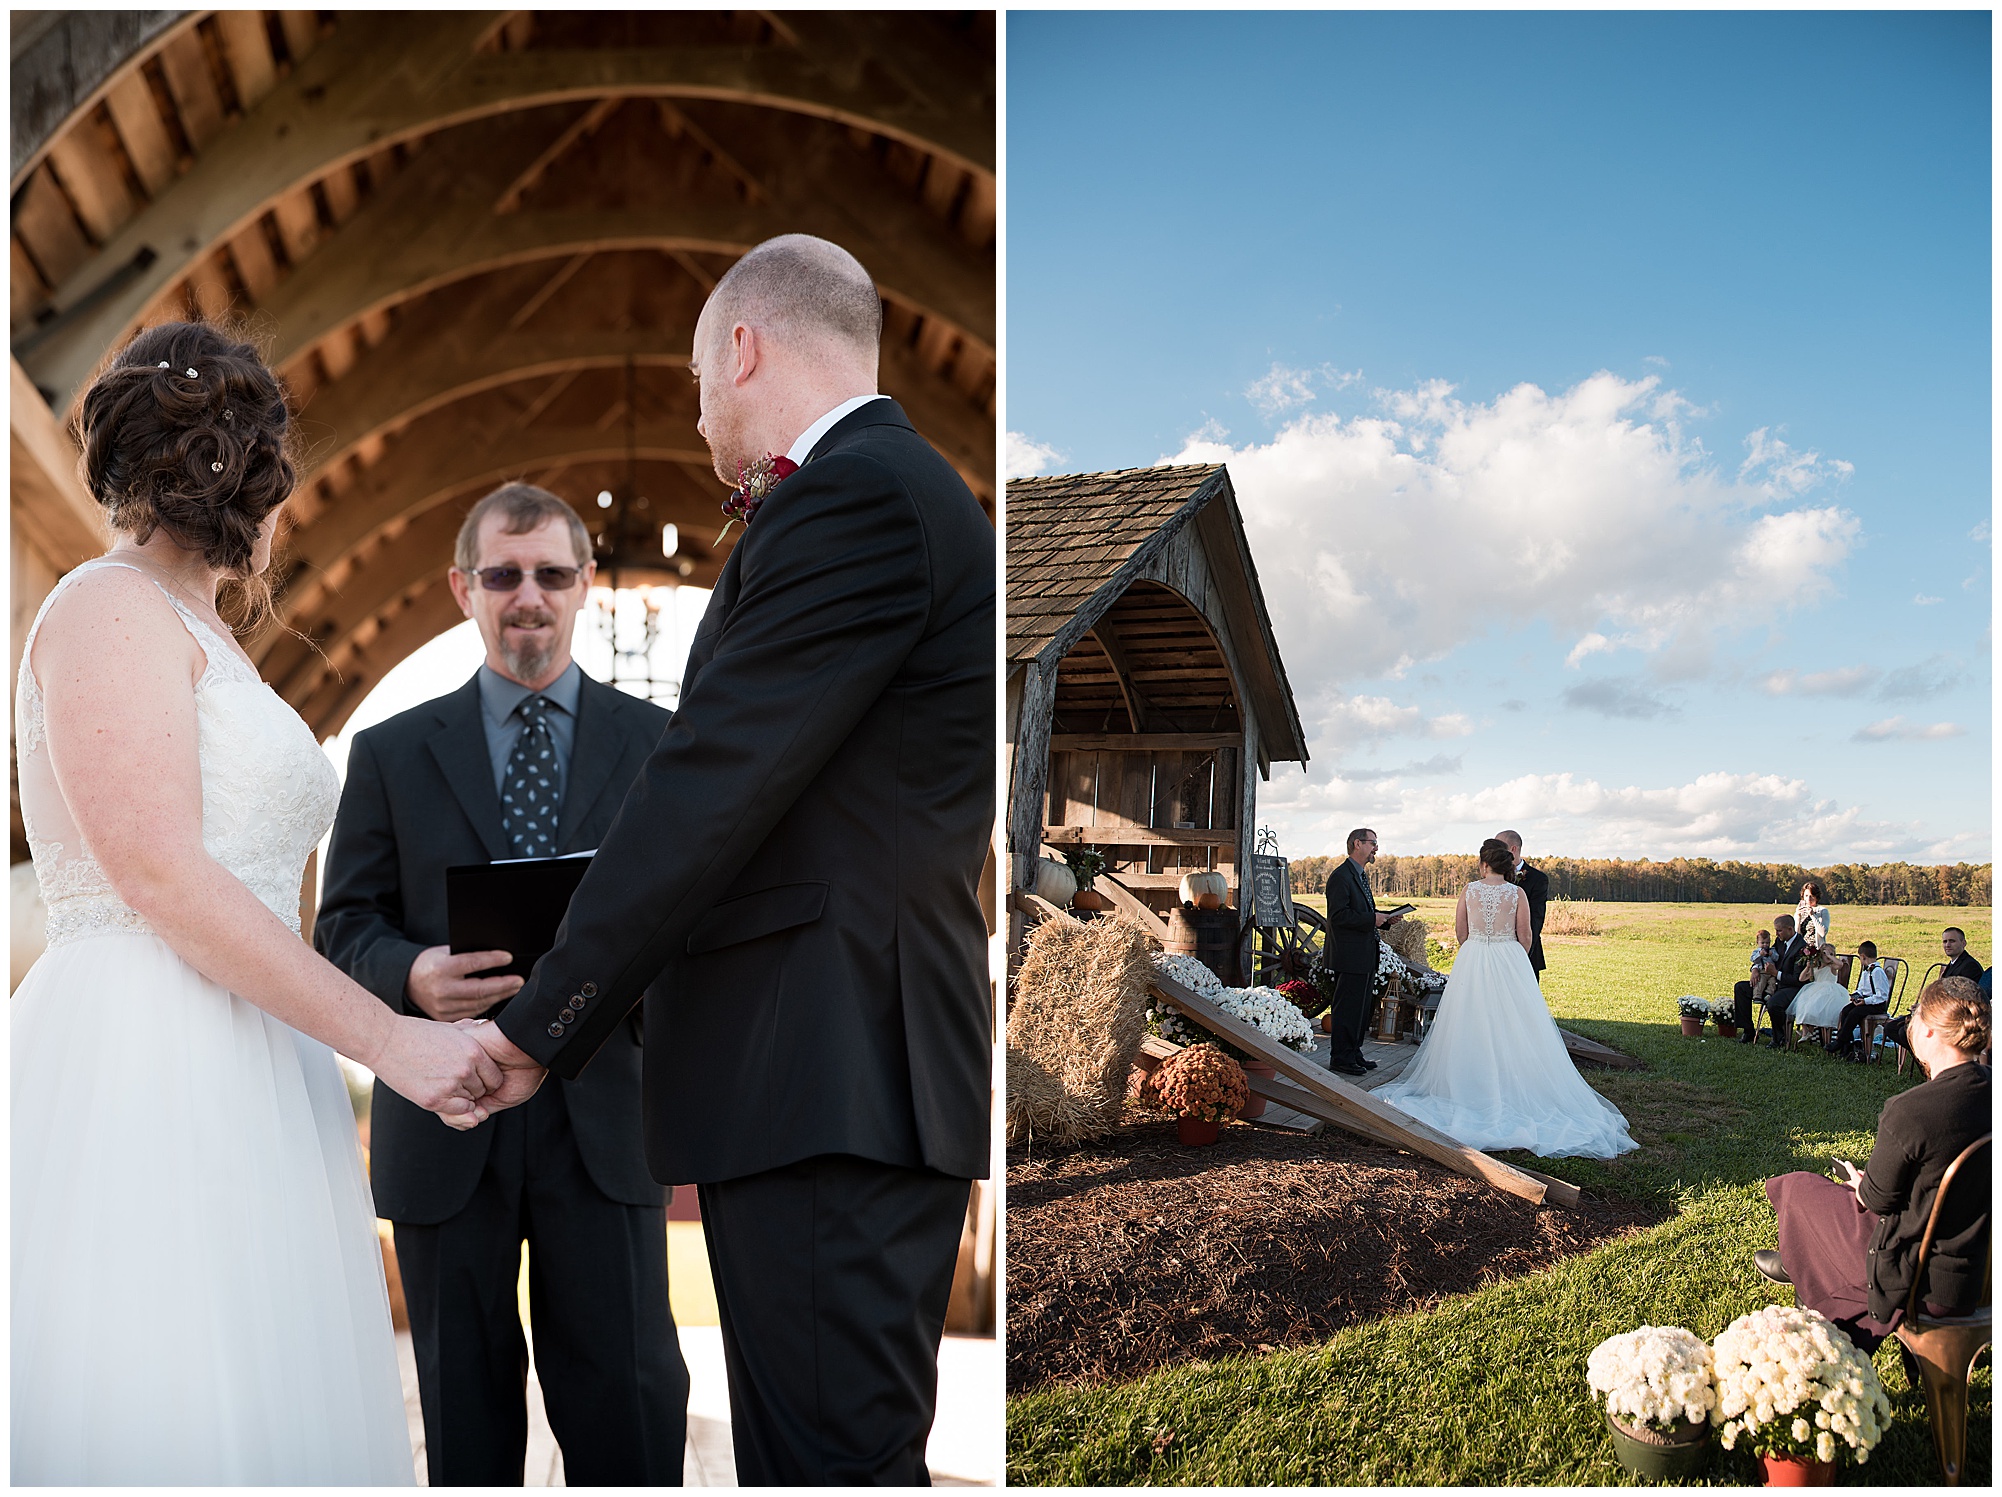 wedding ceremony. wedding photos outdoors at covered bridge inn in lewes delaware. historic wedding barn venue on the eastern shore. fall wedding in november with rustic decor theme.